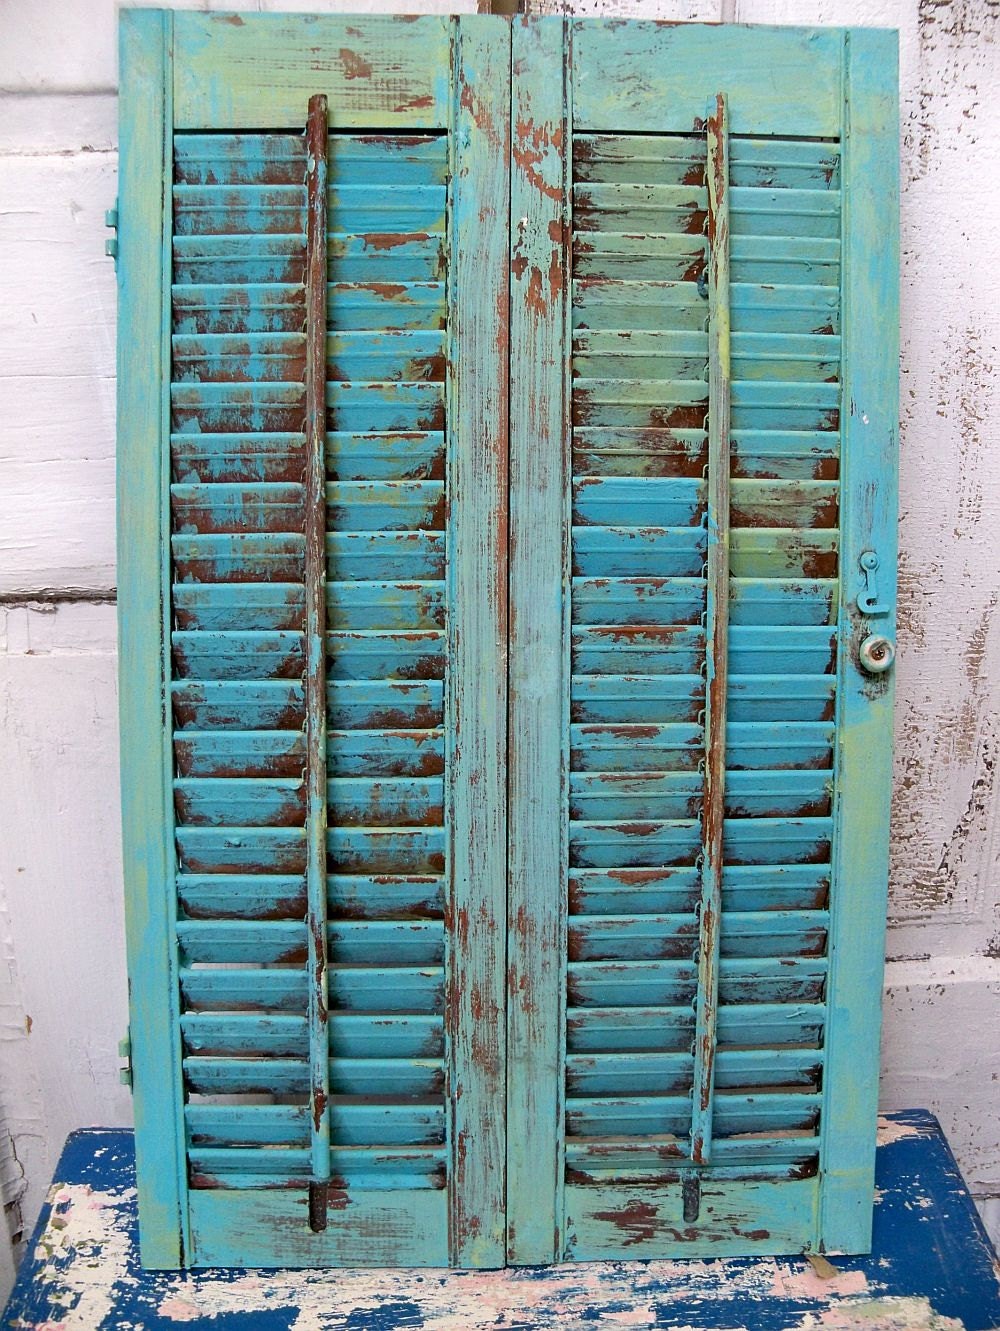 10ideas about Vintage Shutters on Pinterest Shutters, Old